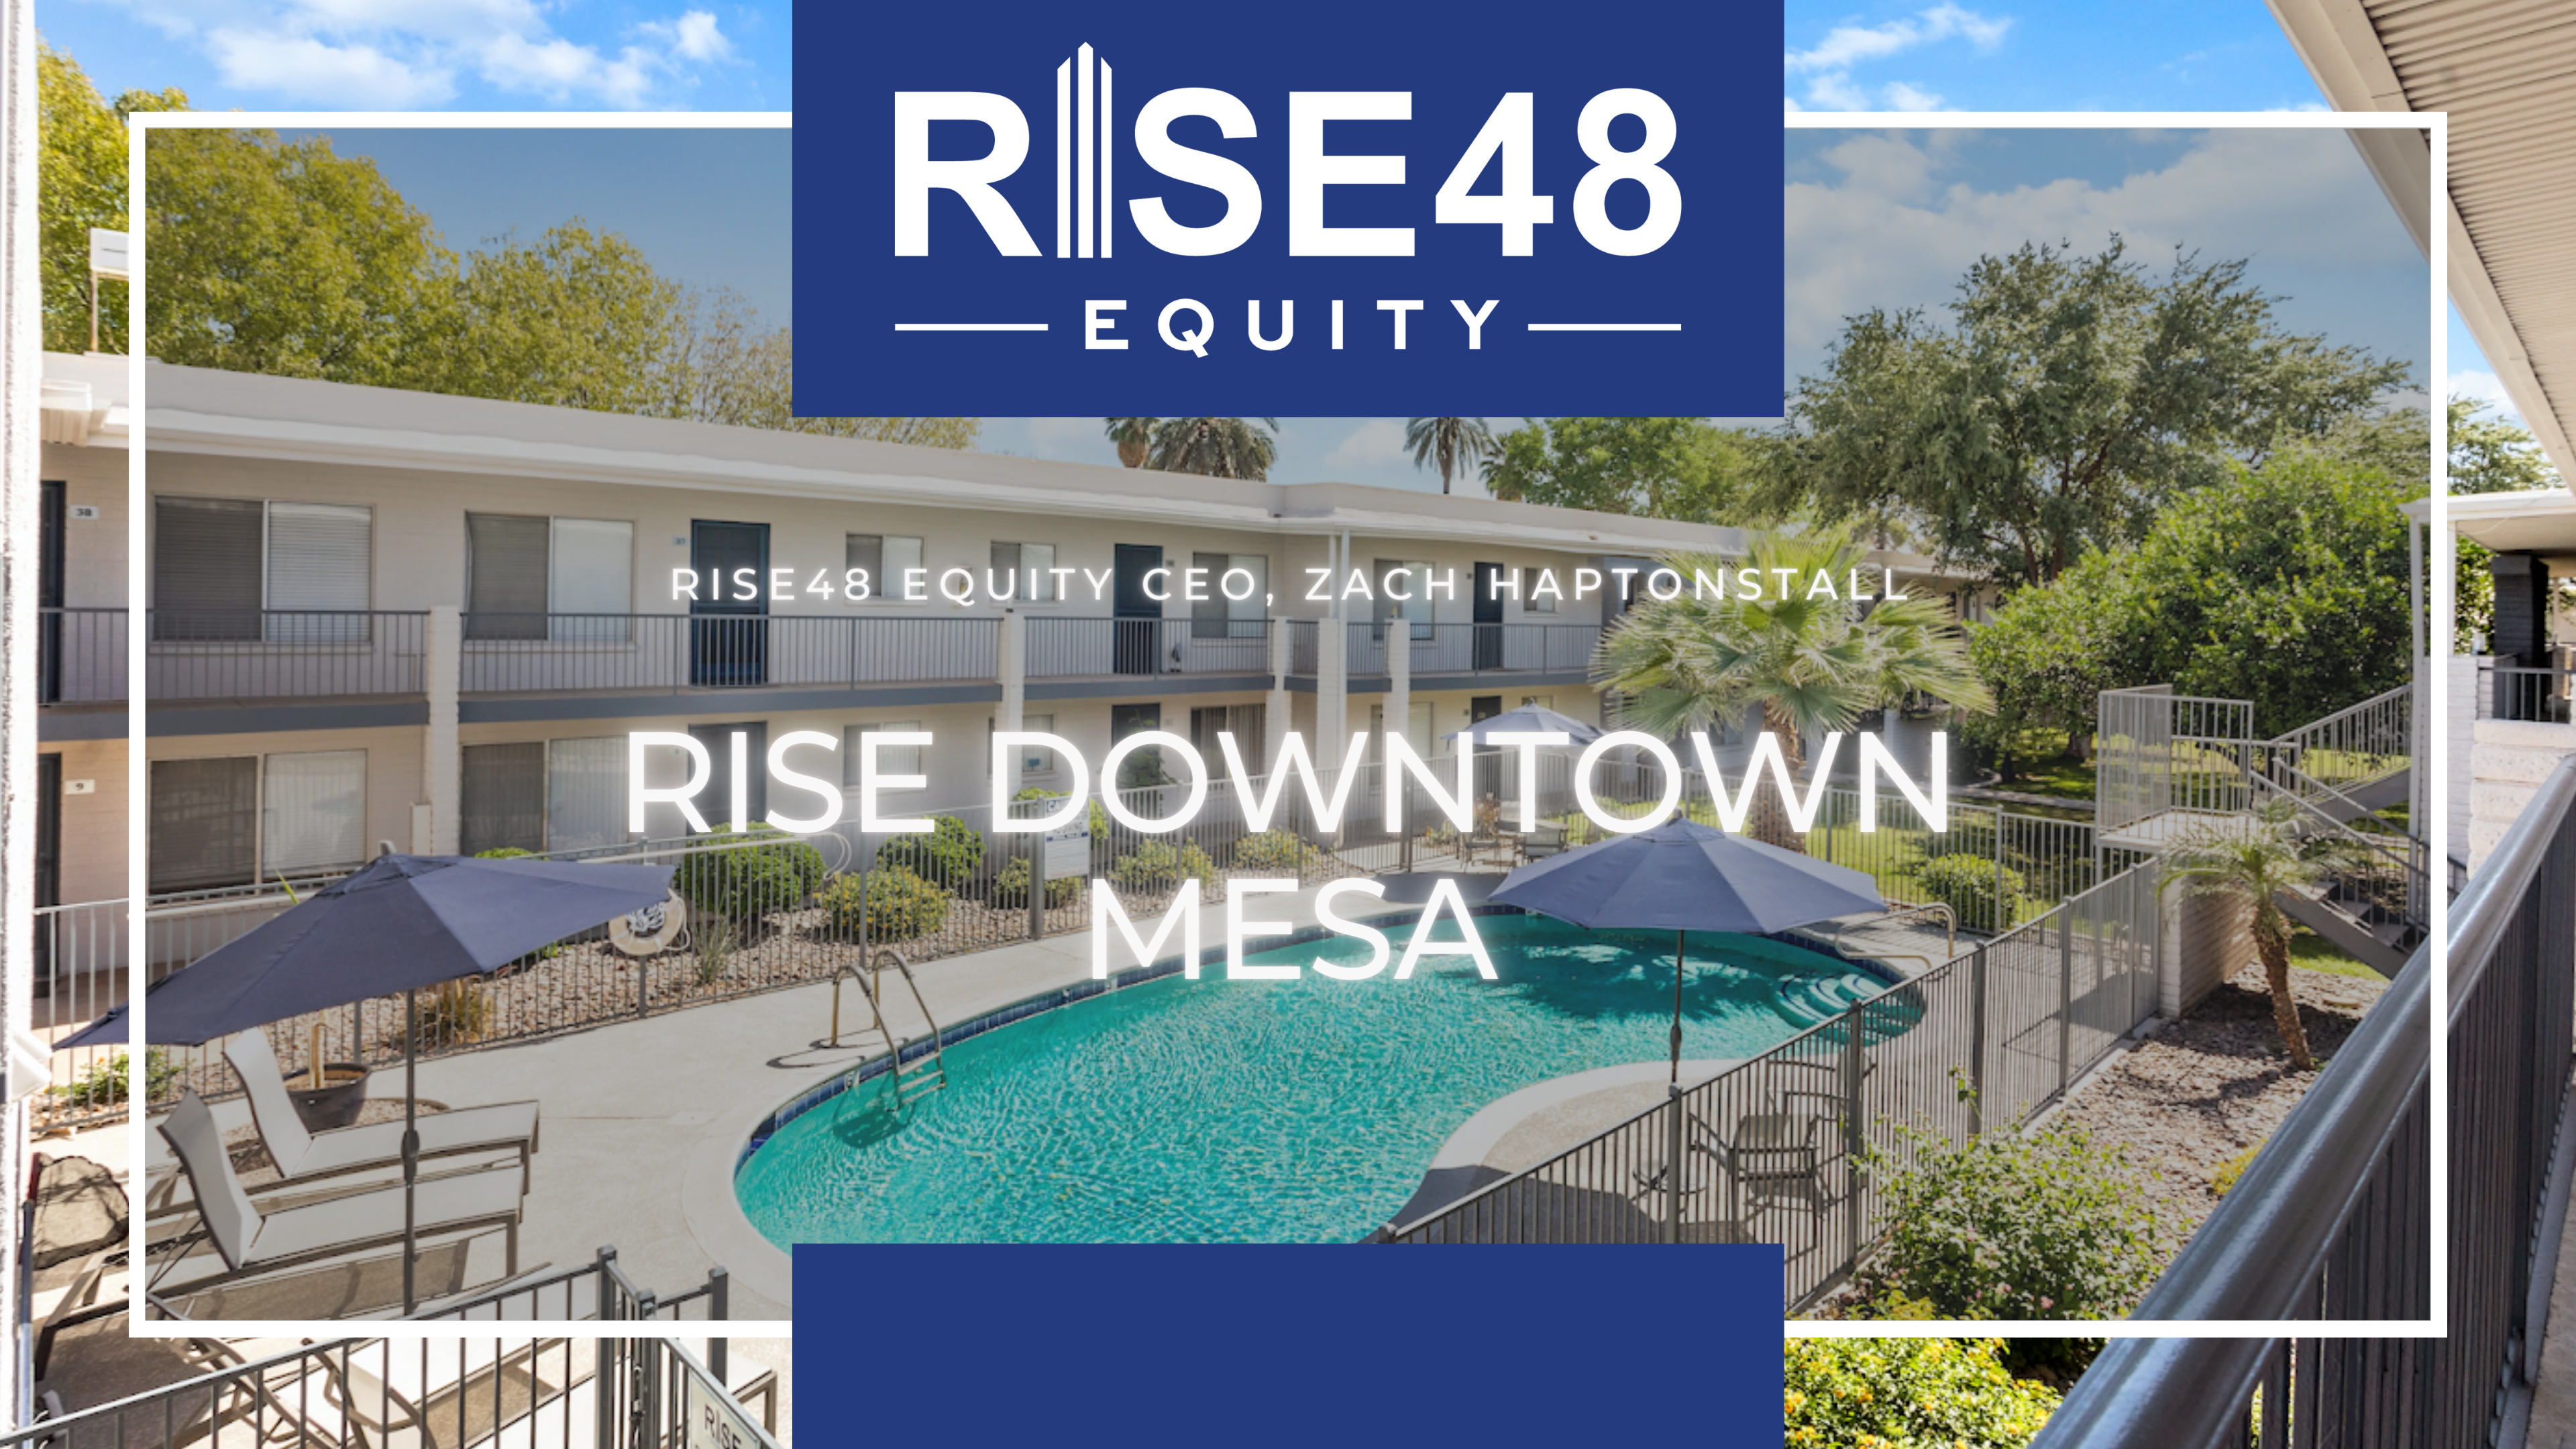 rise downtown mesa renovations & updates | Rise48 Equity | Multifamily investments